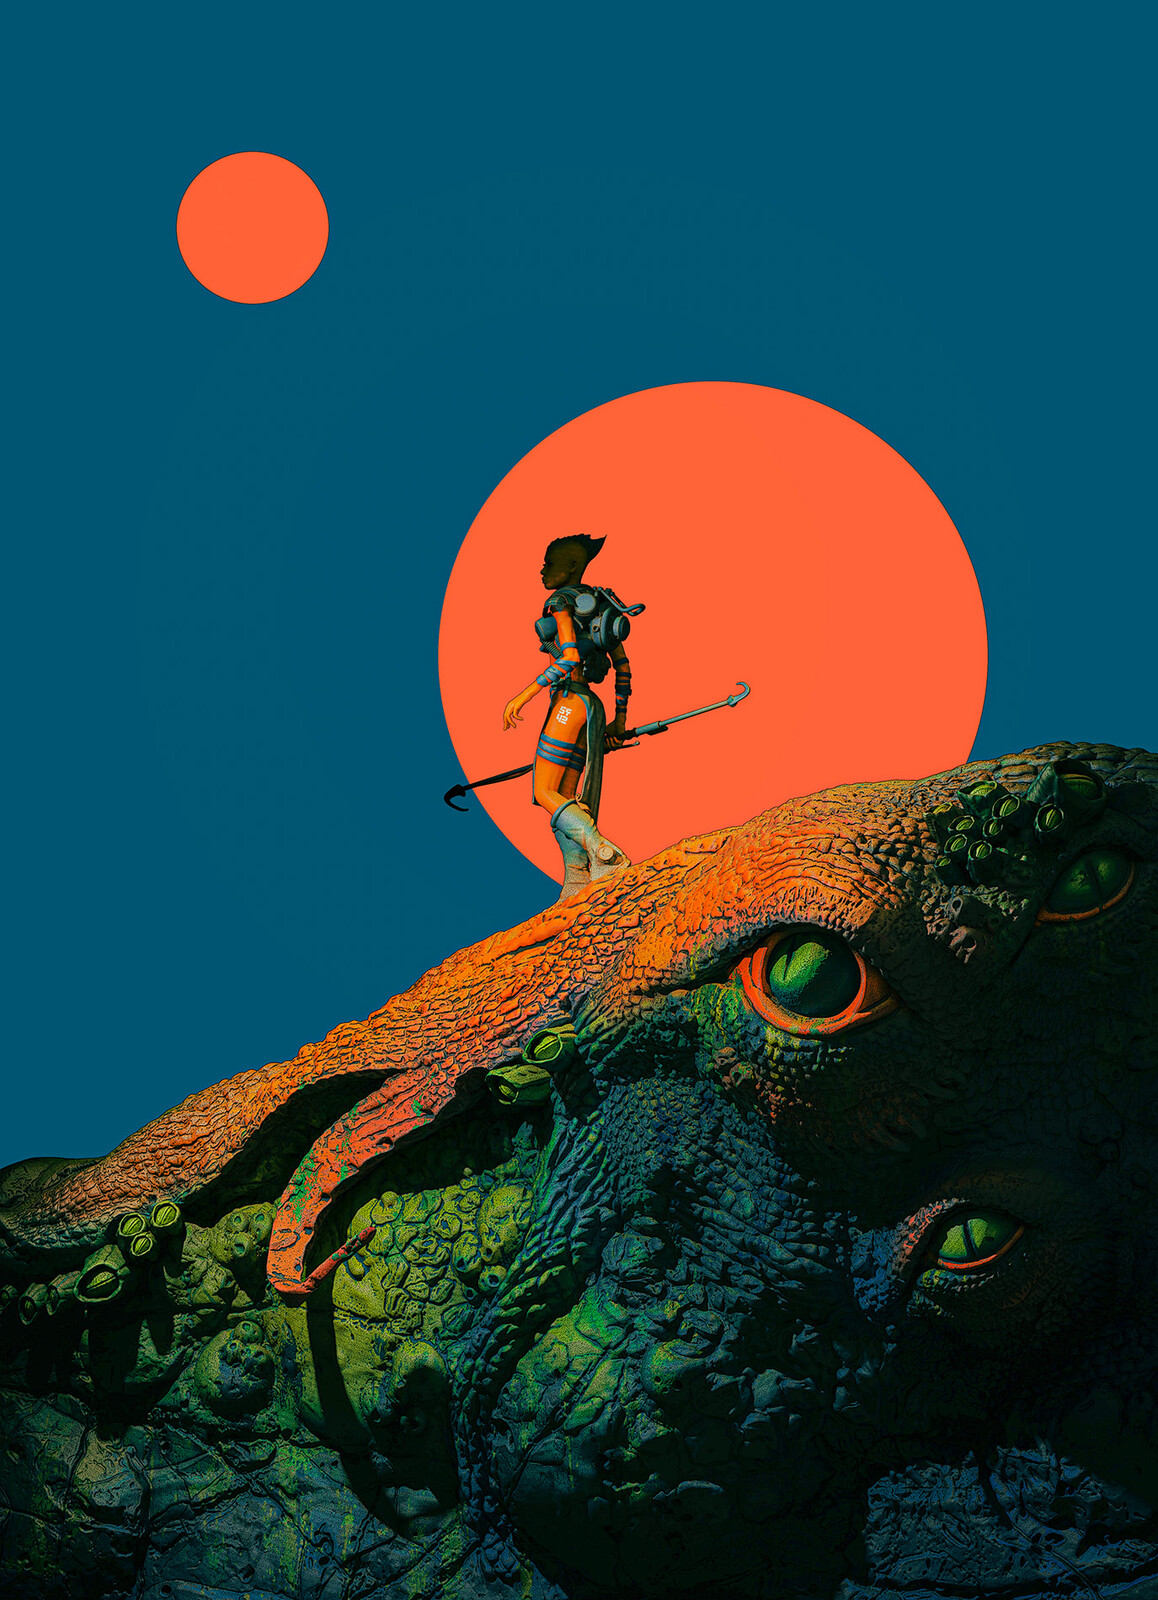 illustration of a hunter walking on the top of a giant octopus monster. Saturated  colors. 70's style cover art